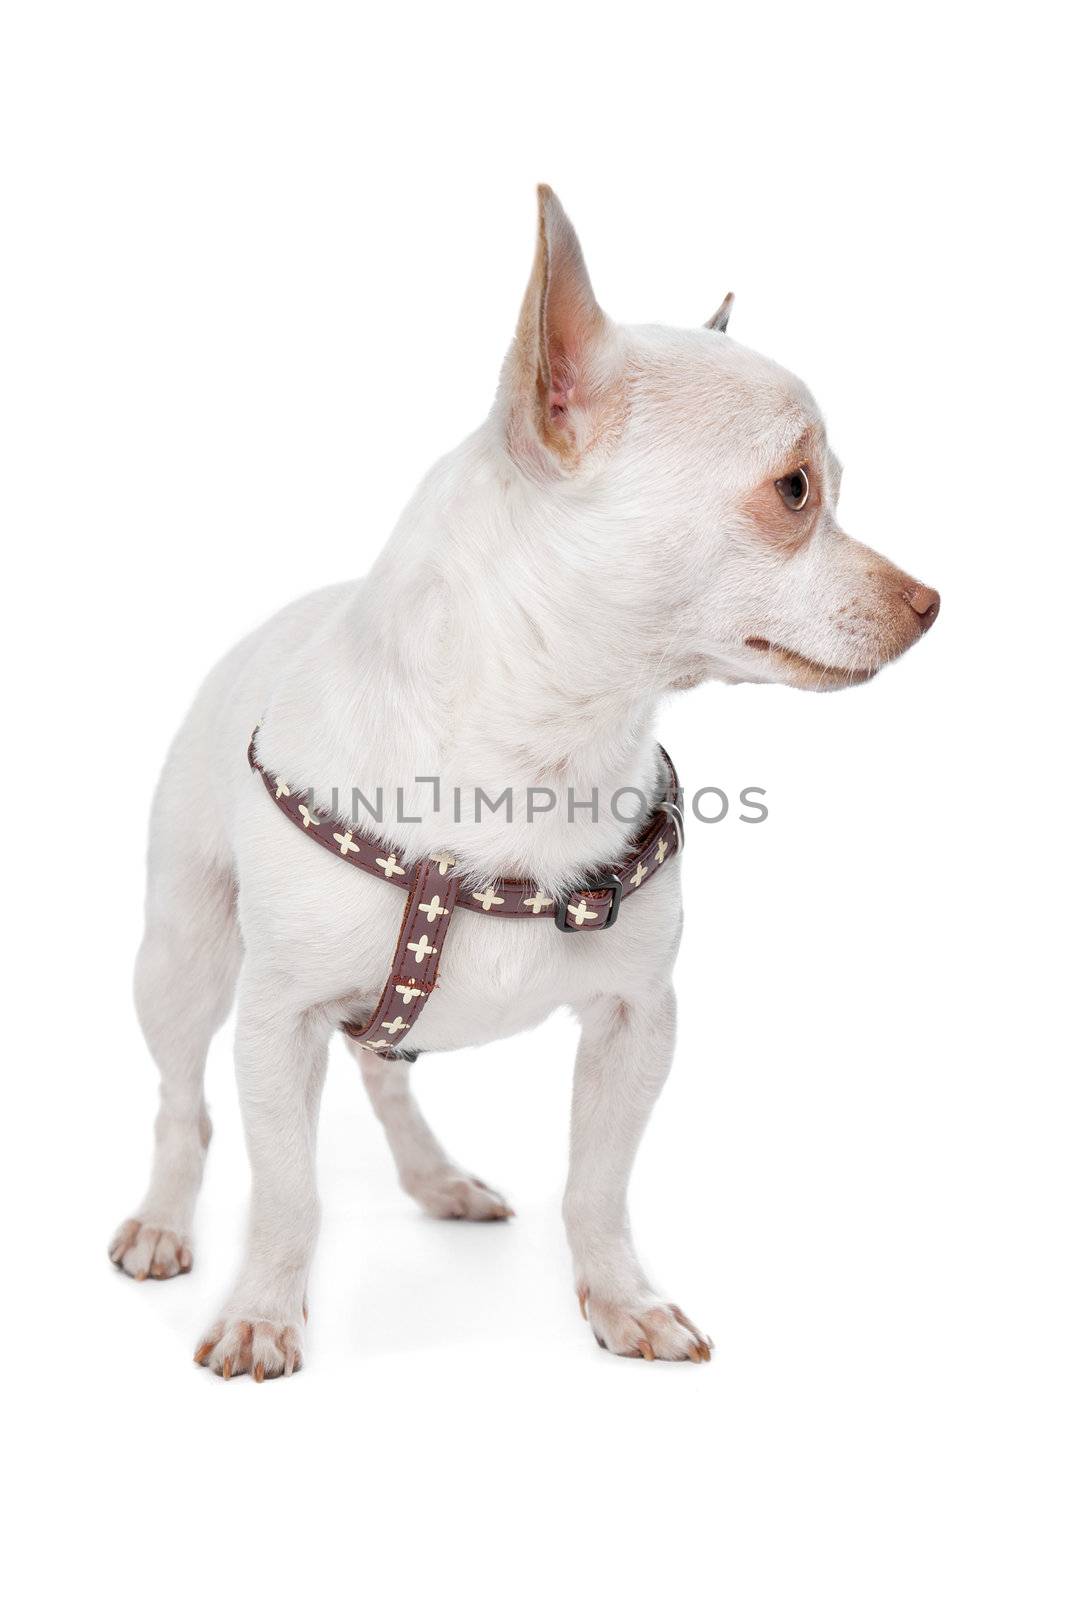 Chihuahua in front of a white background